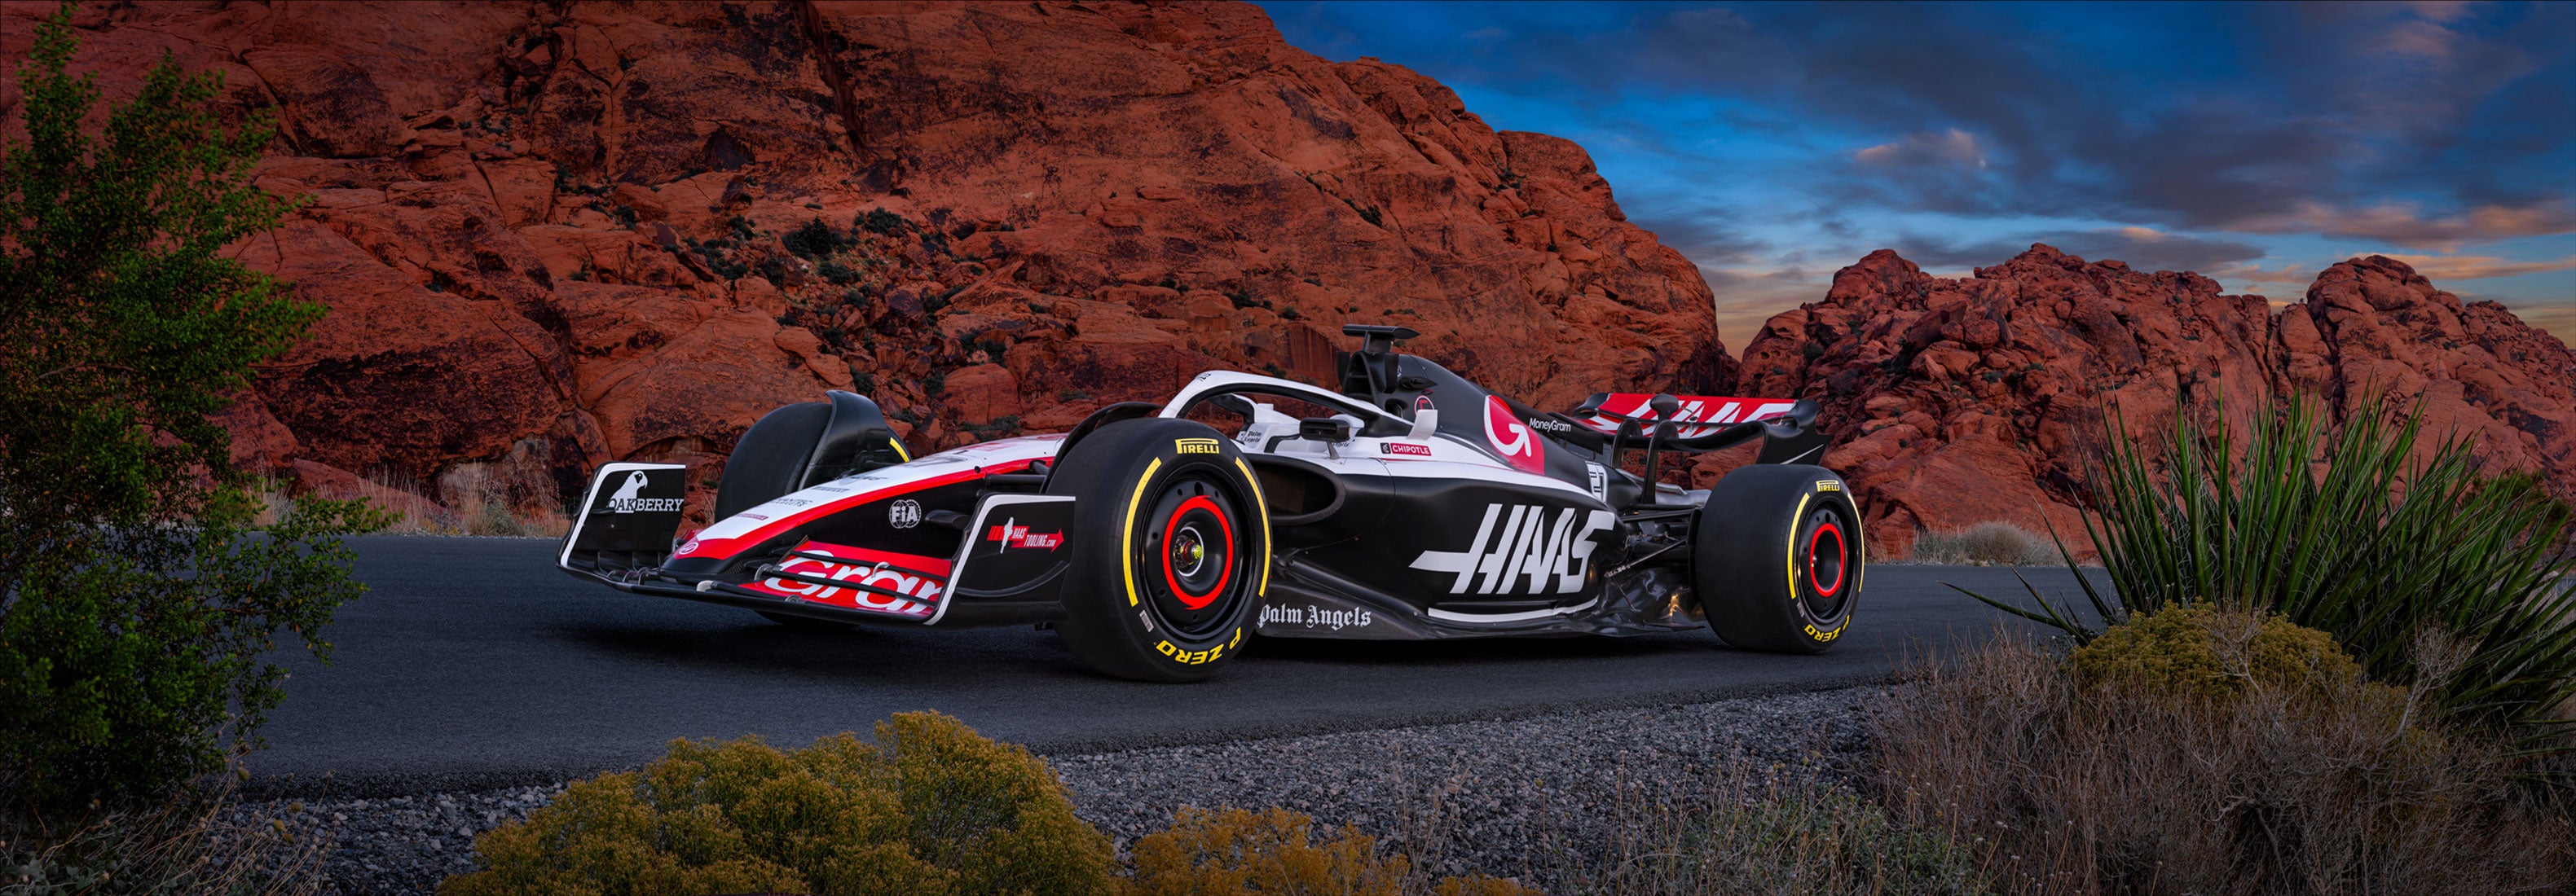 Photo of the Haas F1 race car on the road in front of the cliffs of Red Rock Canyon, Las Vegas just before sunset.